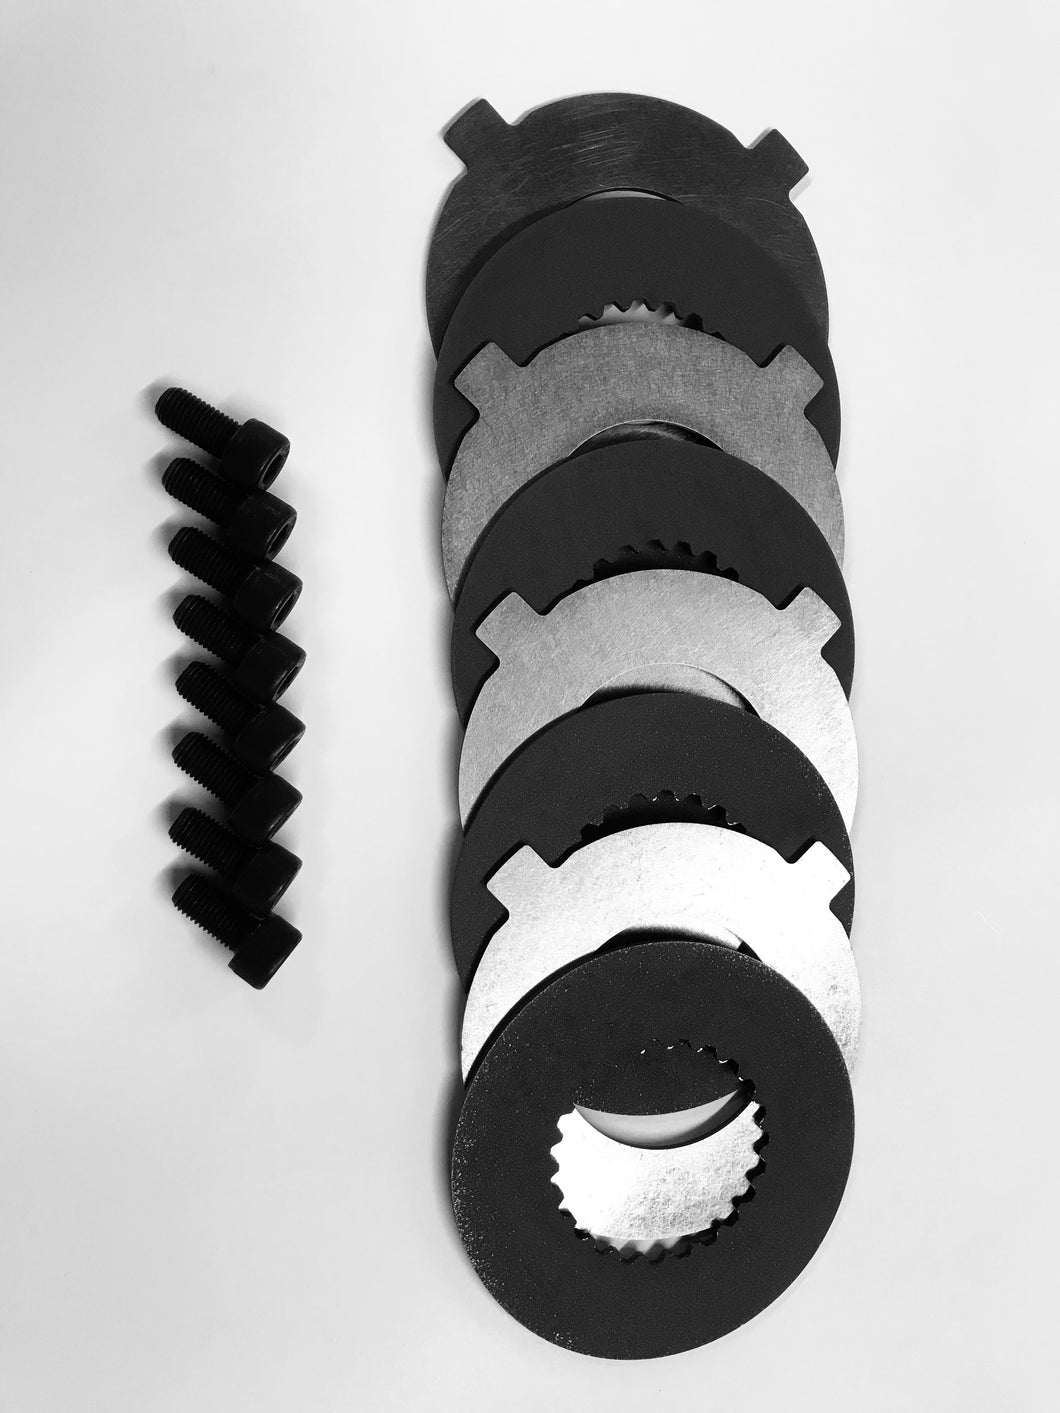 Standard 188mm Differential 4-Clutch Extreme Upgrade Kit